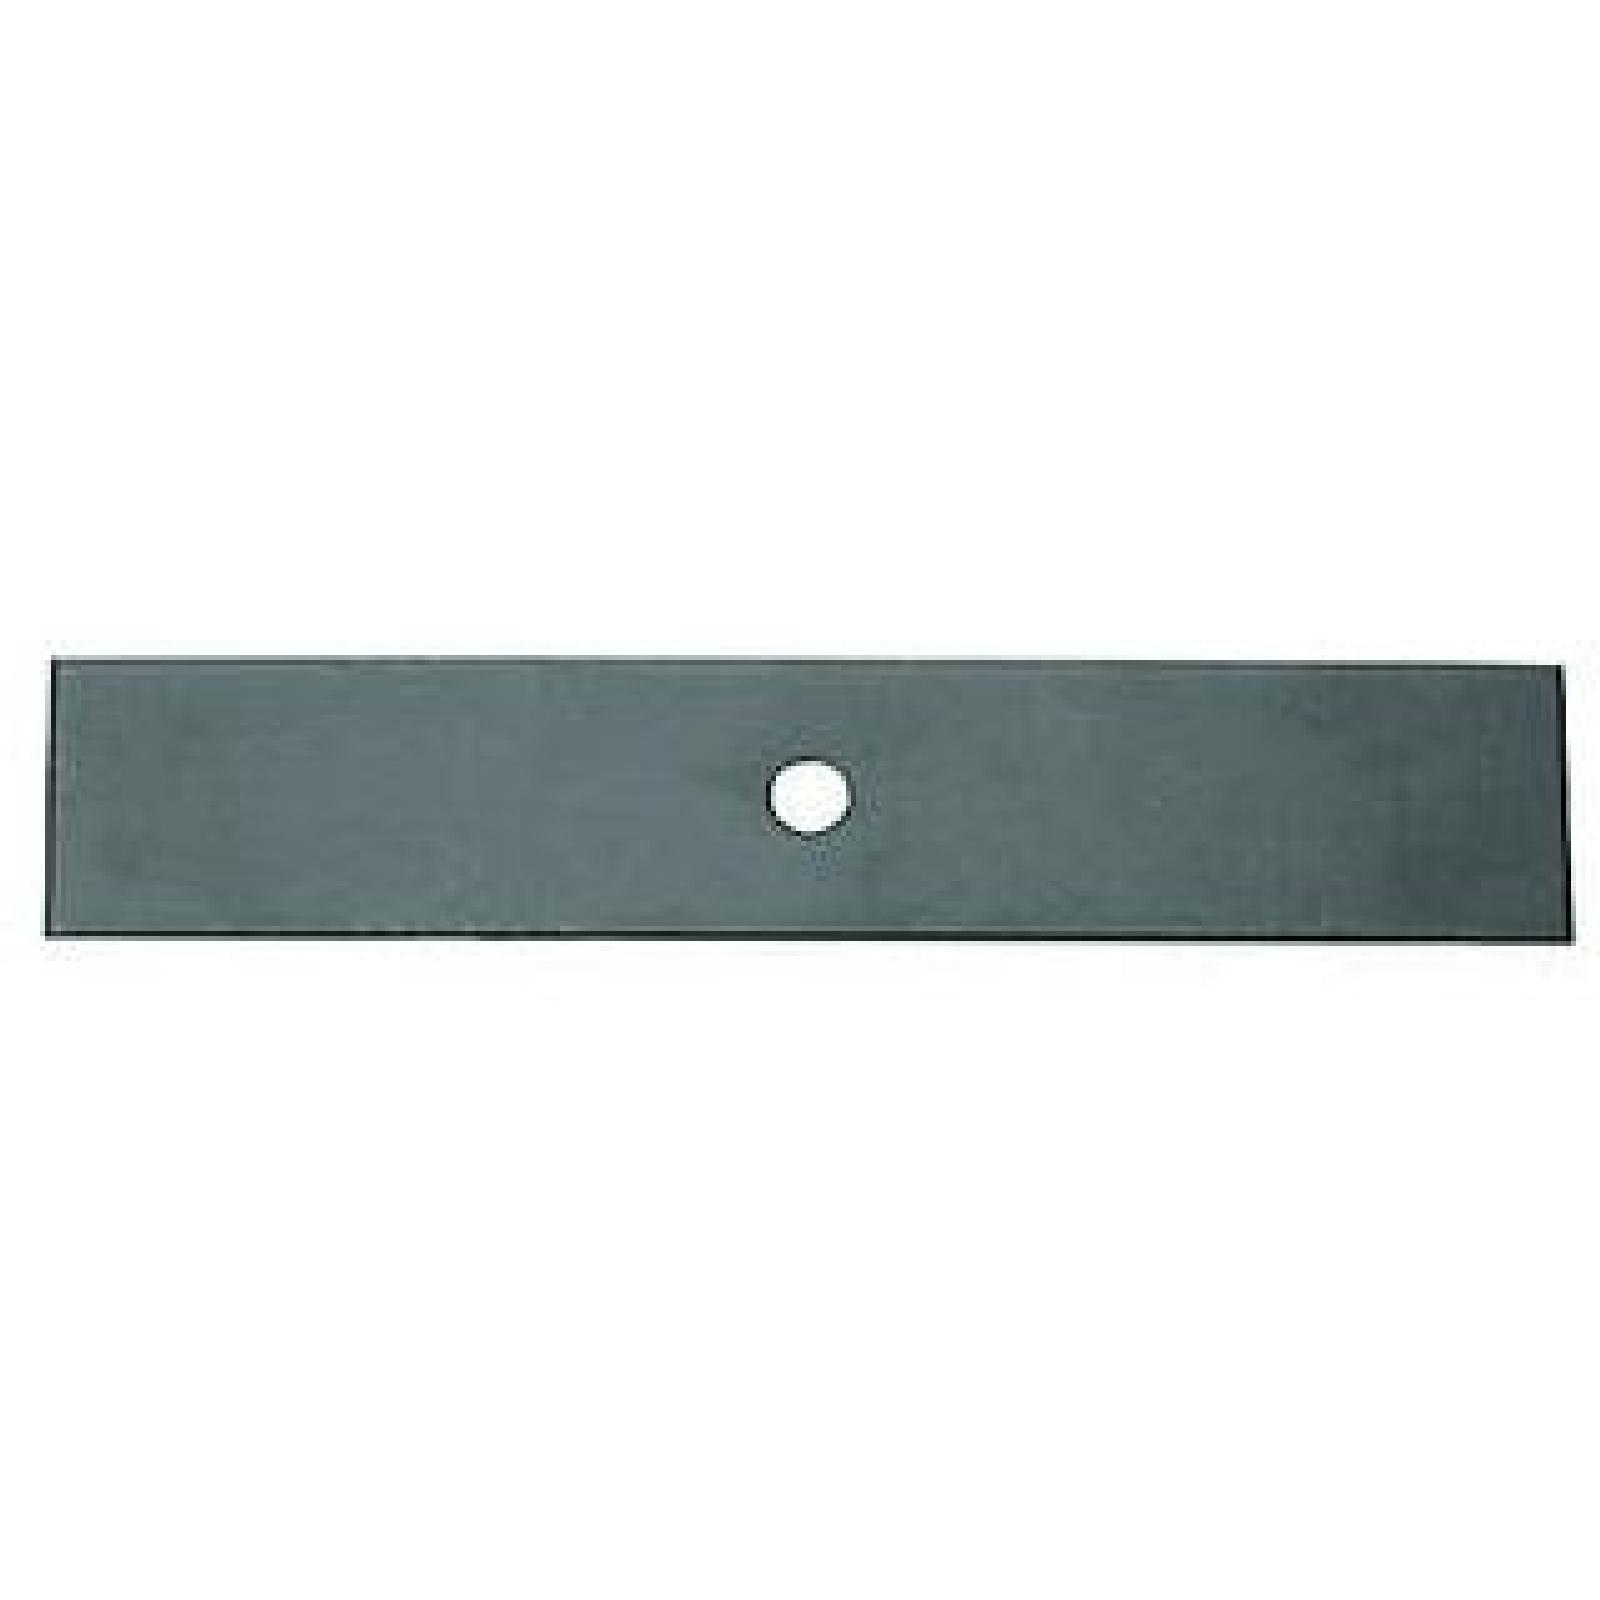 EDGER BLADE, 8 3/4IN, WEE part# 40-010 by Oregon